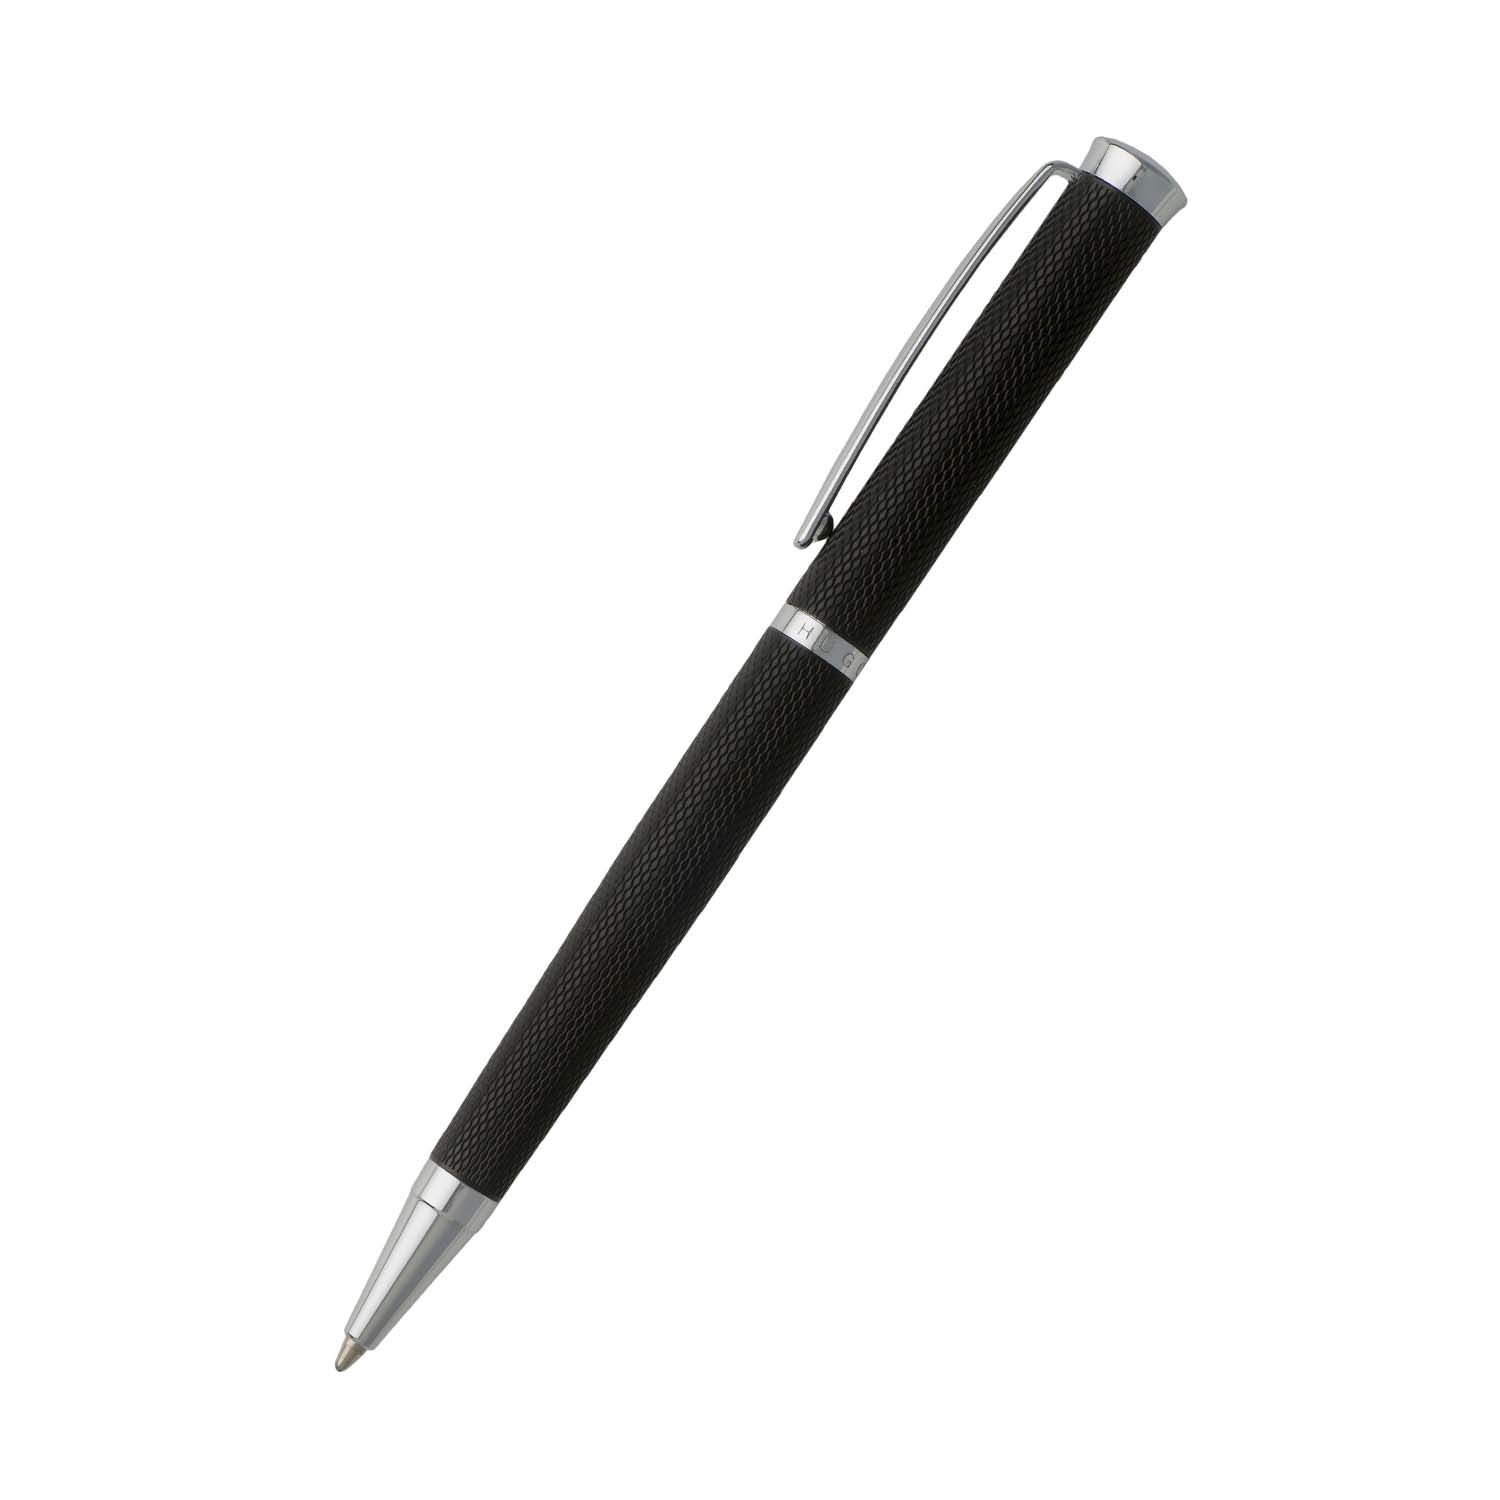 Hugo Boss Hsy7994A Sophisticated Brass Ballpoint Pen - Diamond Black With Silver Trims